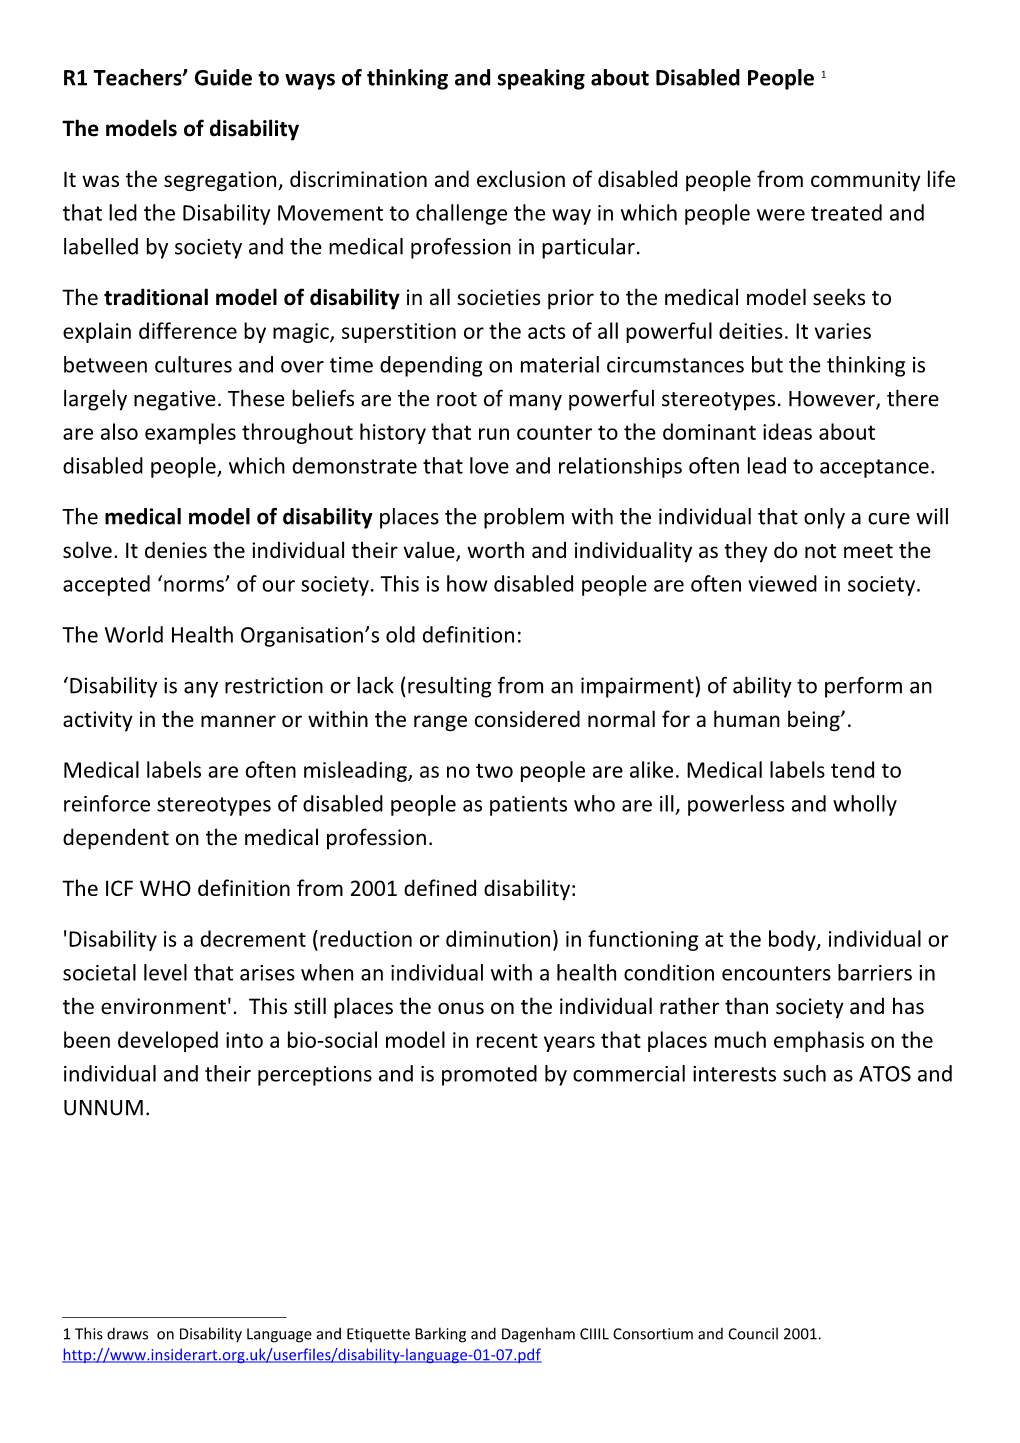 R1 Teachers Guide to Ways of Thinking and Speaking About Disabled People 1